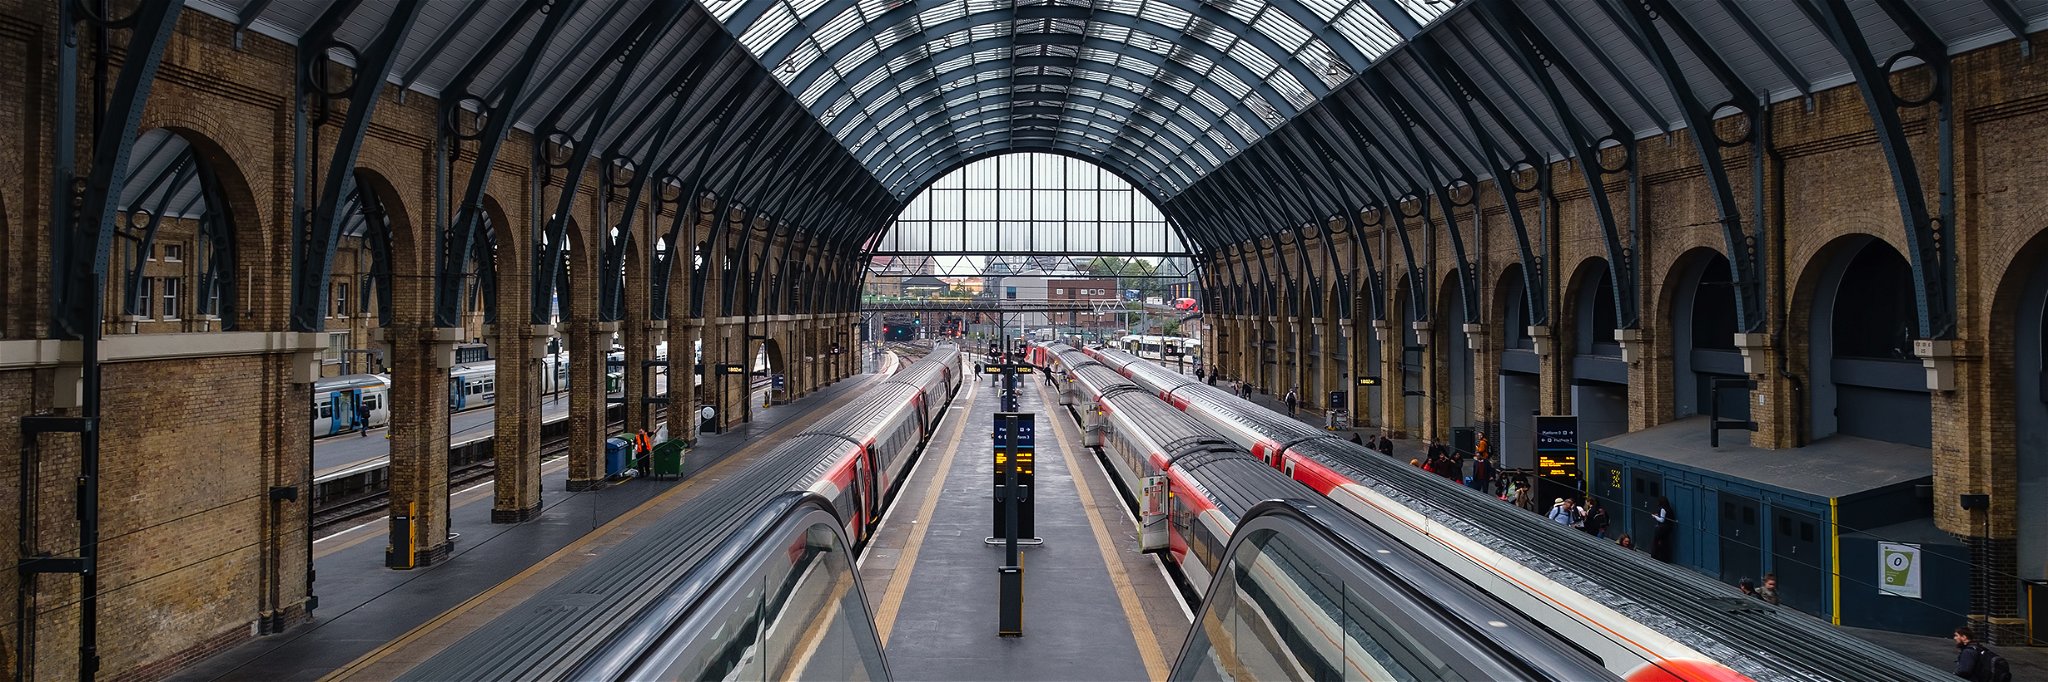 The last train from London to Edinburgh will leave Kings Cross at 14:00 on Wednesday.